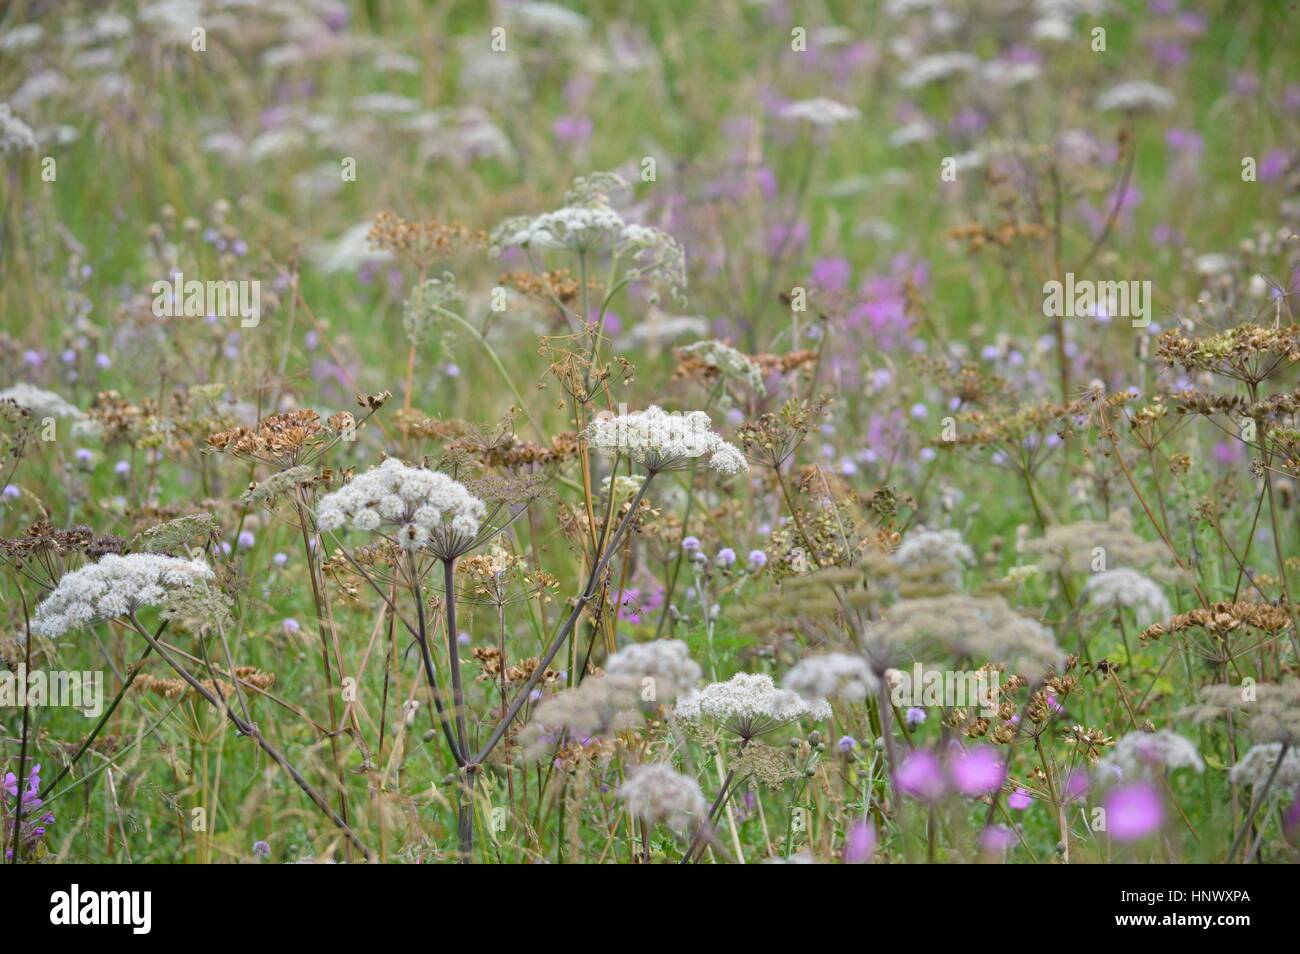 A field of colourful flowers taken in Stoke On Trent, England. Stock Photo